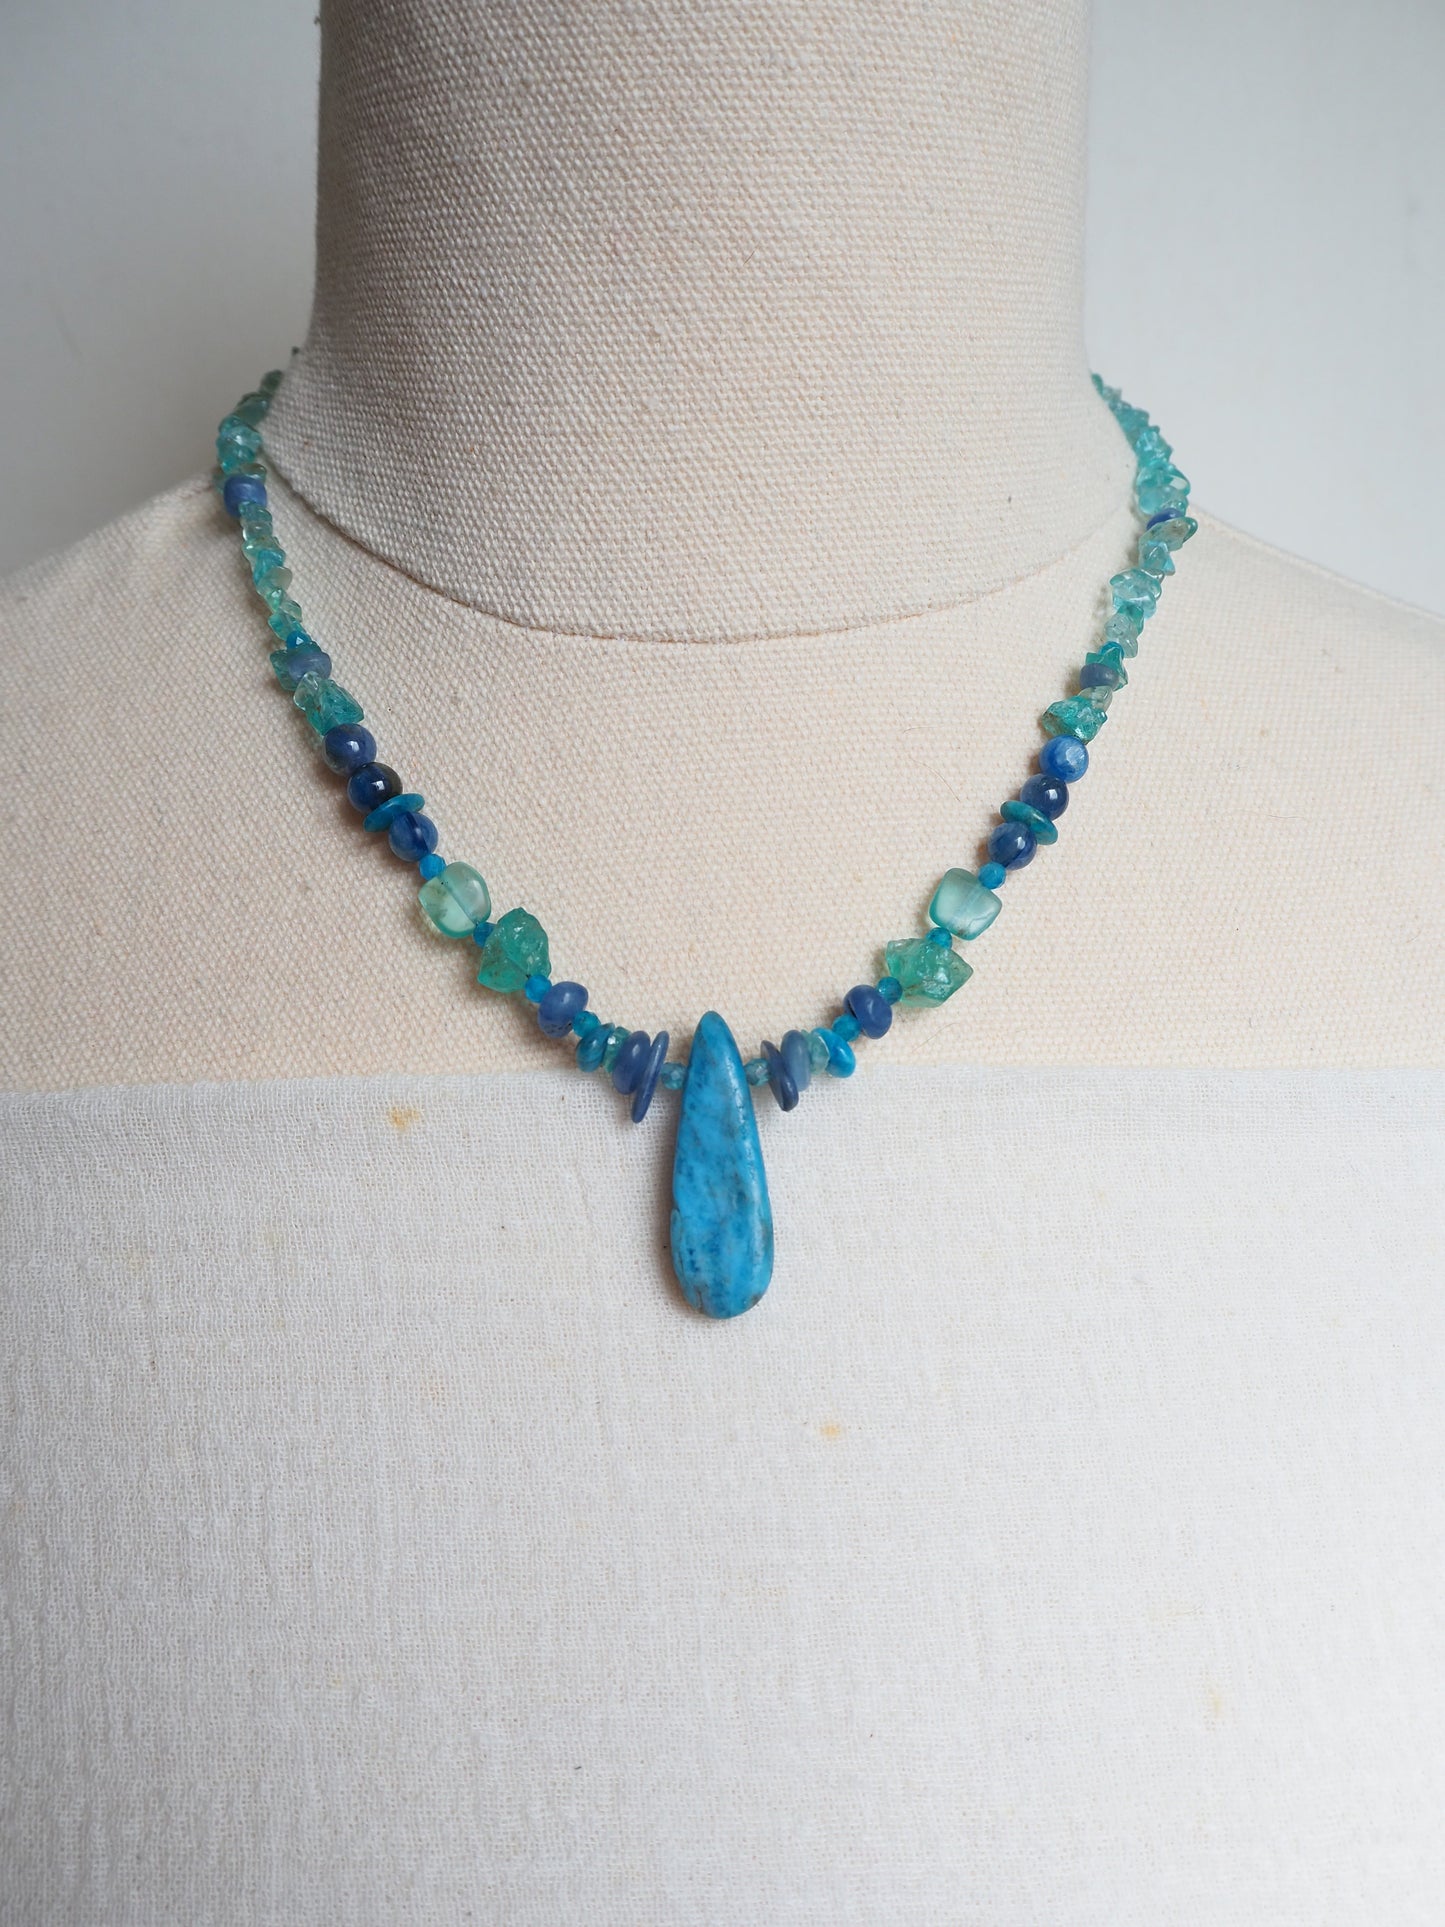 Blue Kyanite & Apatite Necklace with Sterling Silver Extender Chain